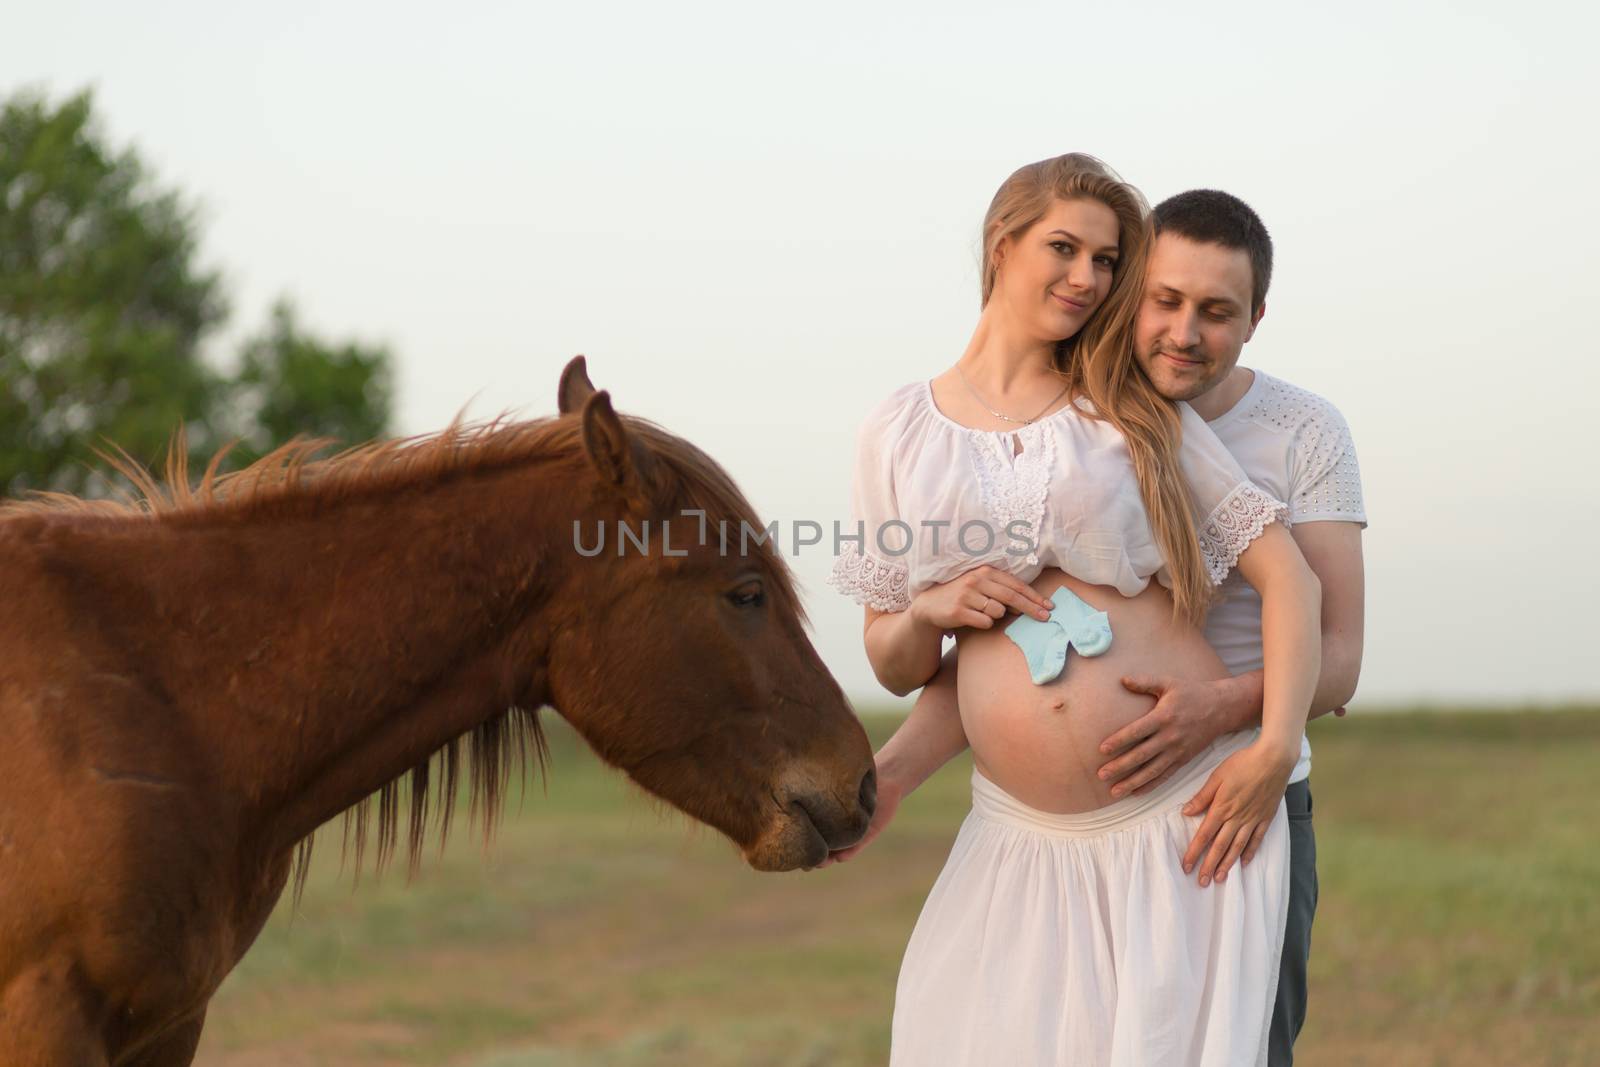 A farmer with his pregnant wife at sunset on his farm. Posing with a horse.